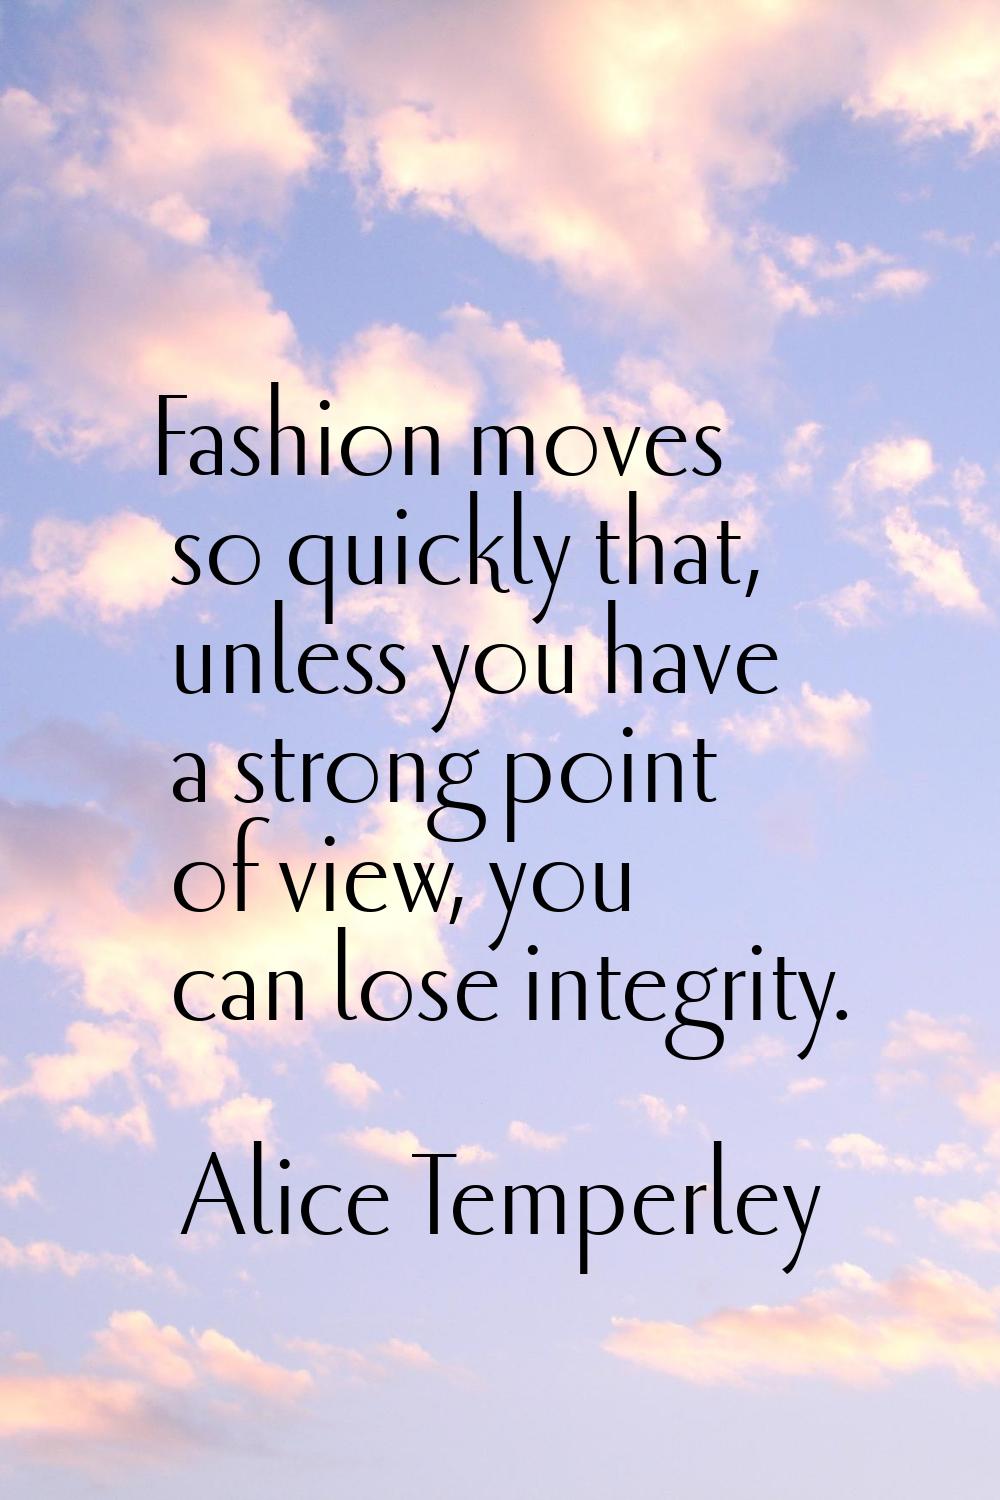 Fashion moves so quickly that, unless you have a strong point of view, you can lose integrity.